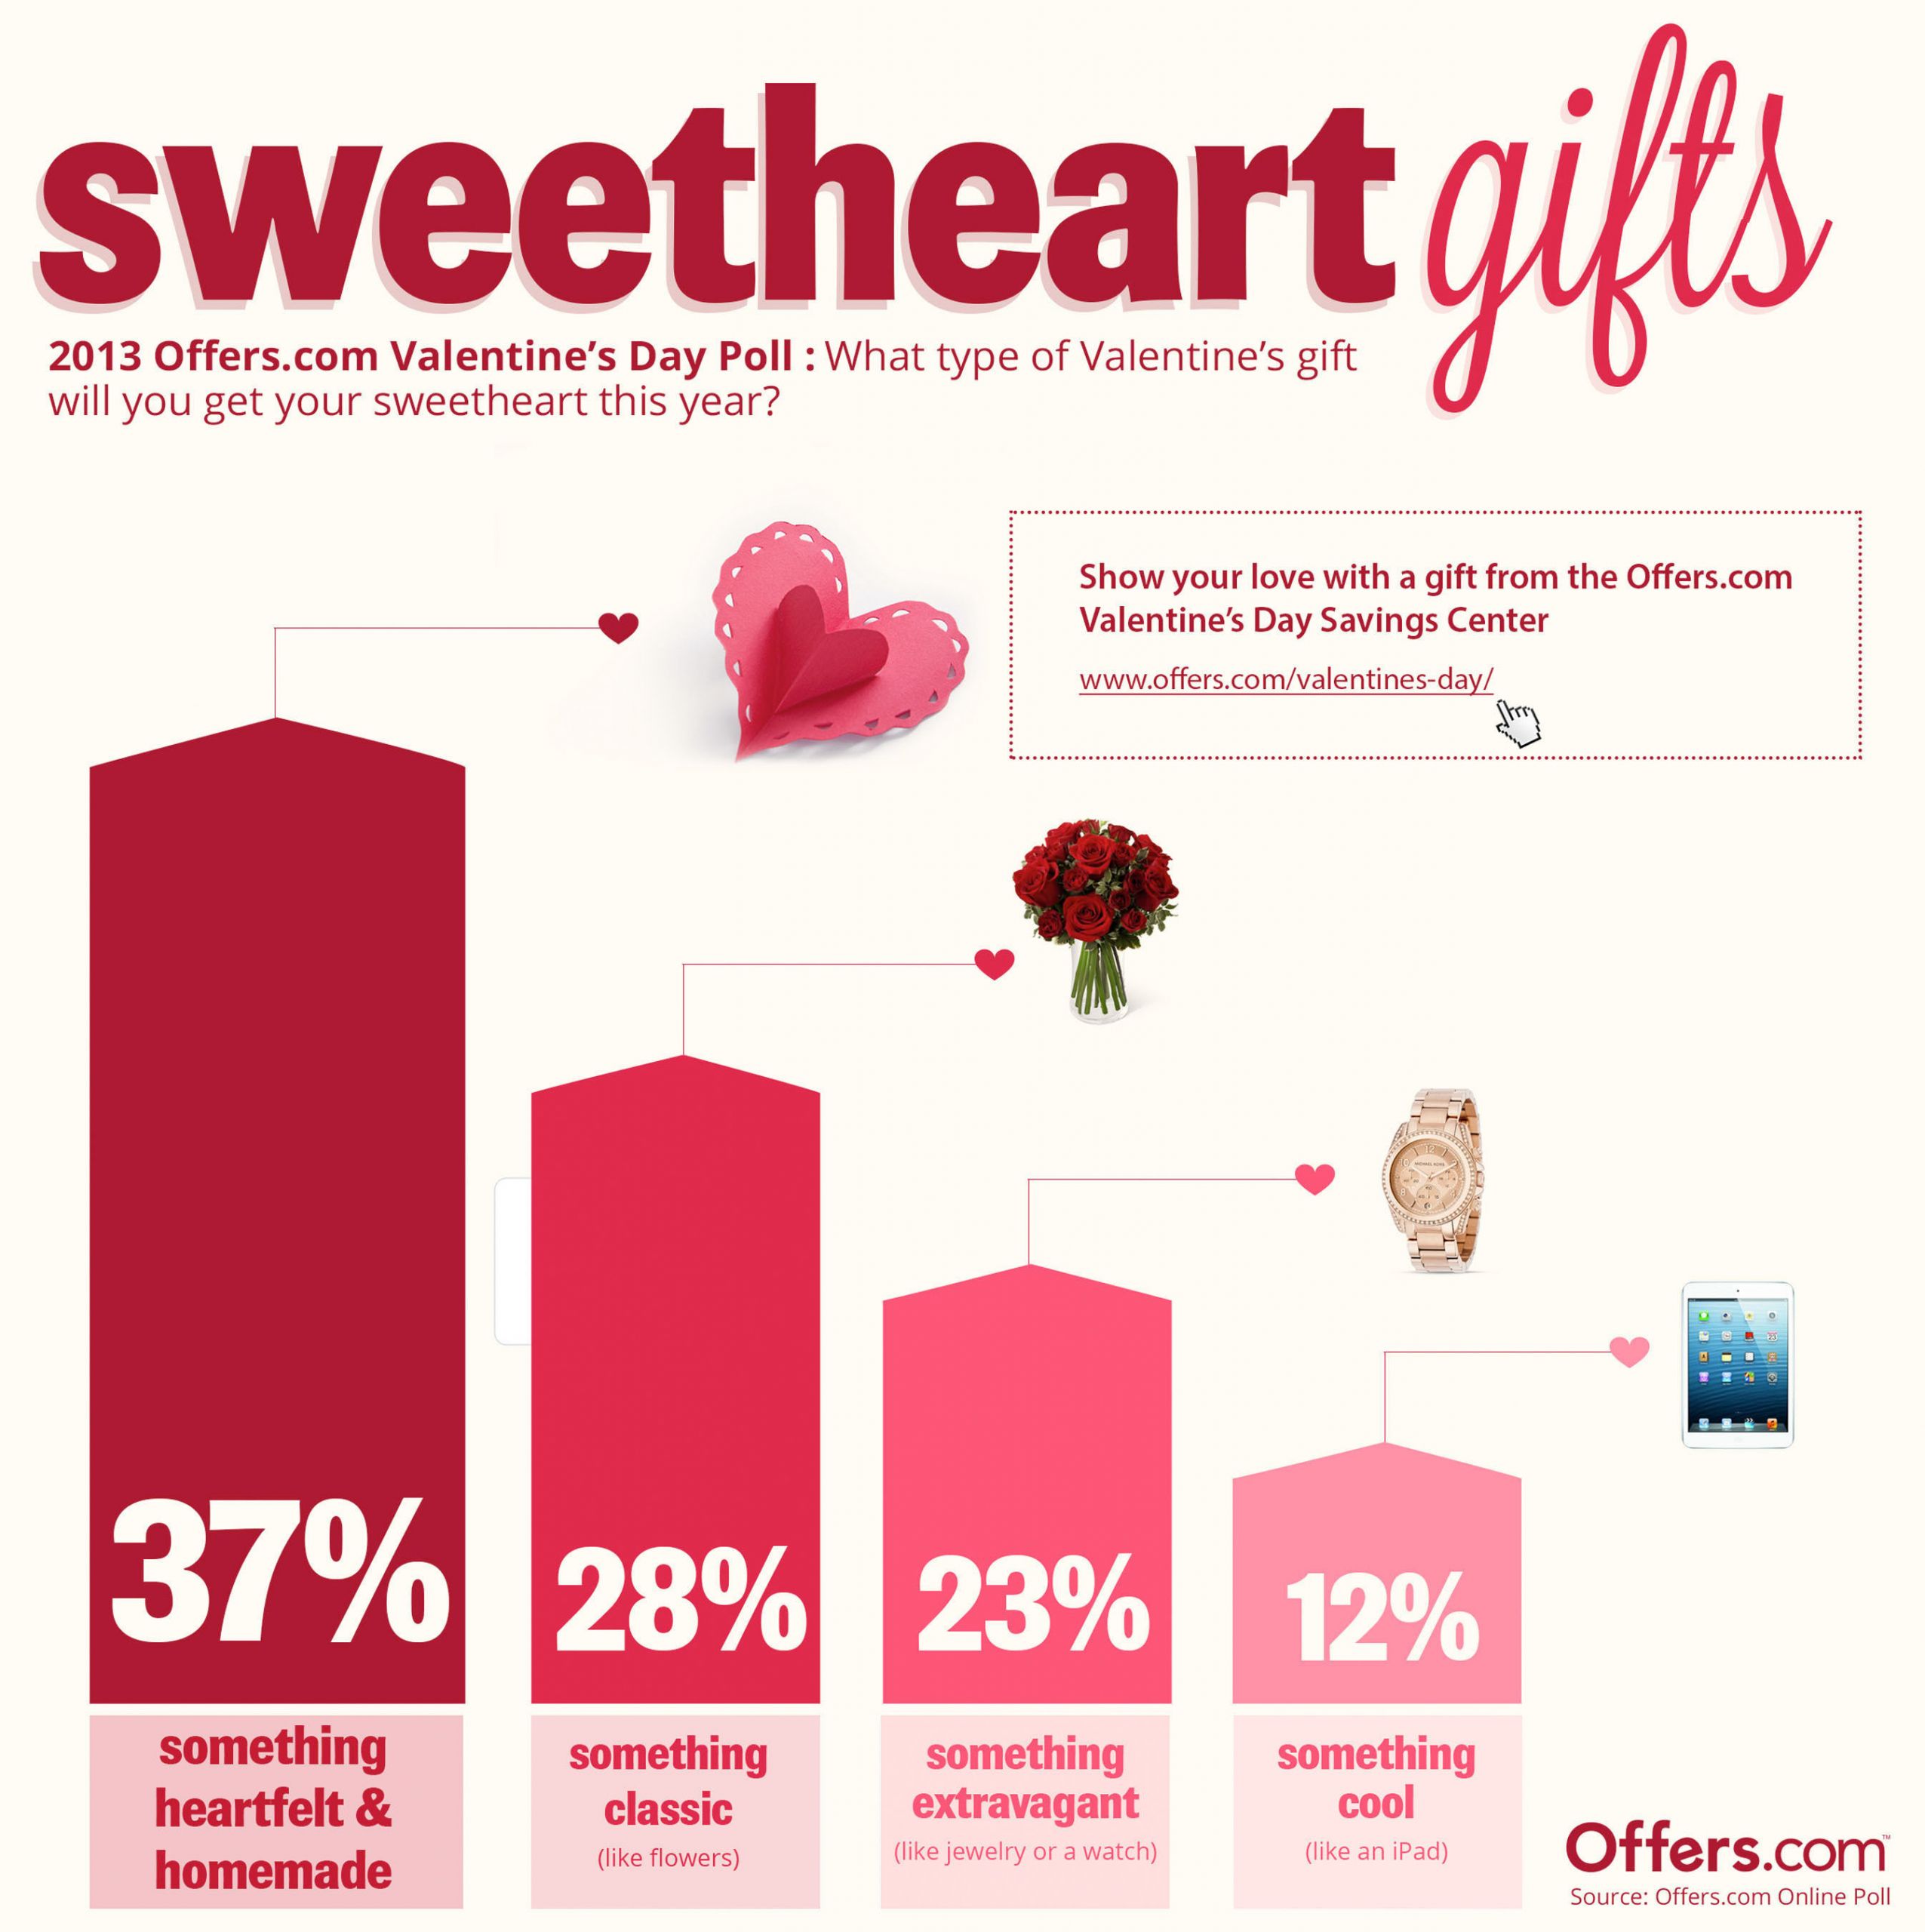 Gay Valentines Gift Ideas
 fers Poll Reveals Top 4 Gift Ideas for Valentine’s Day